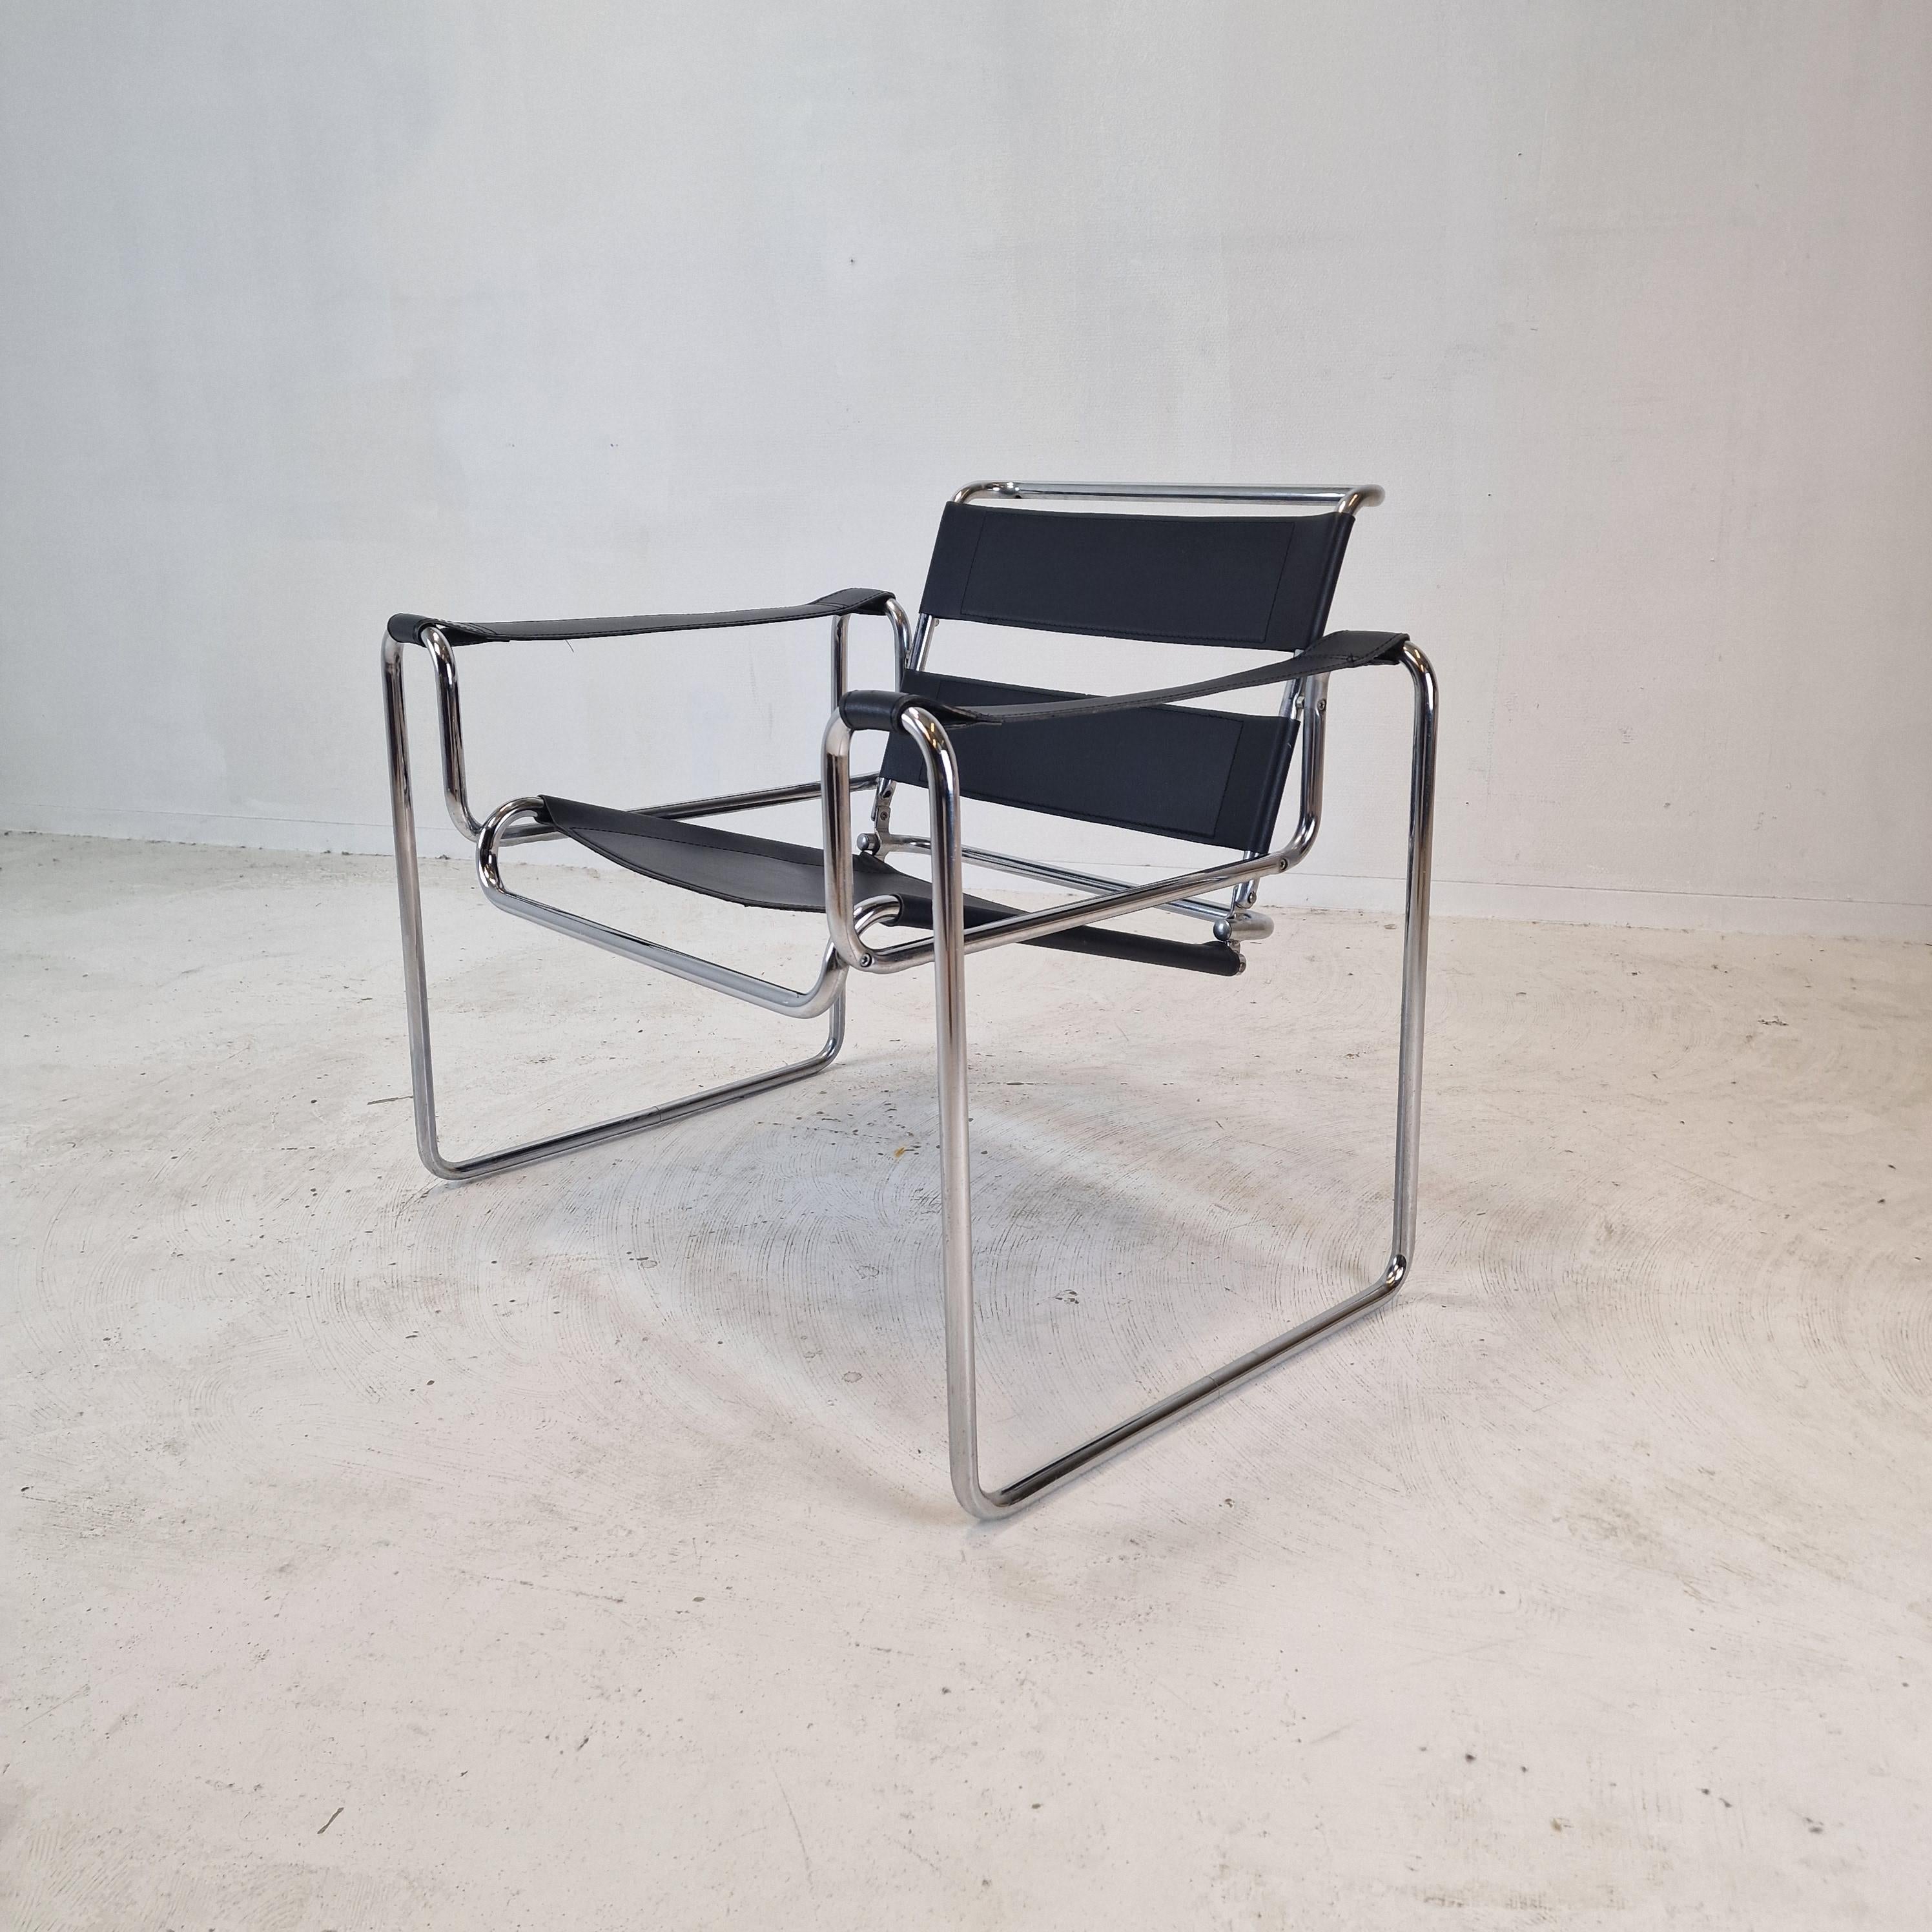 Iconic black armchair, after the model Wassily by Marcel Breuer. 
Produced in the 80's in Italy and designed by Marcel Breuer in 1929. 

Rectangular seat in black leather.
The structure, which supports the various leather parts, is in chromed